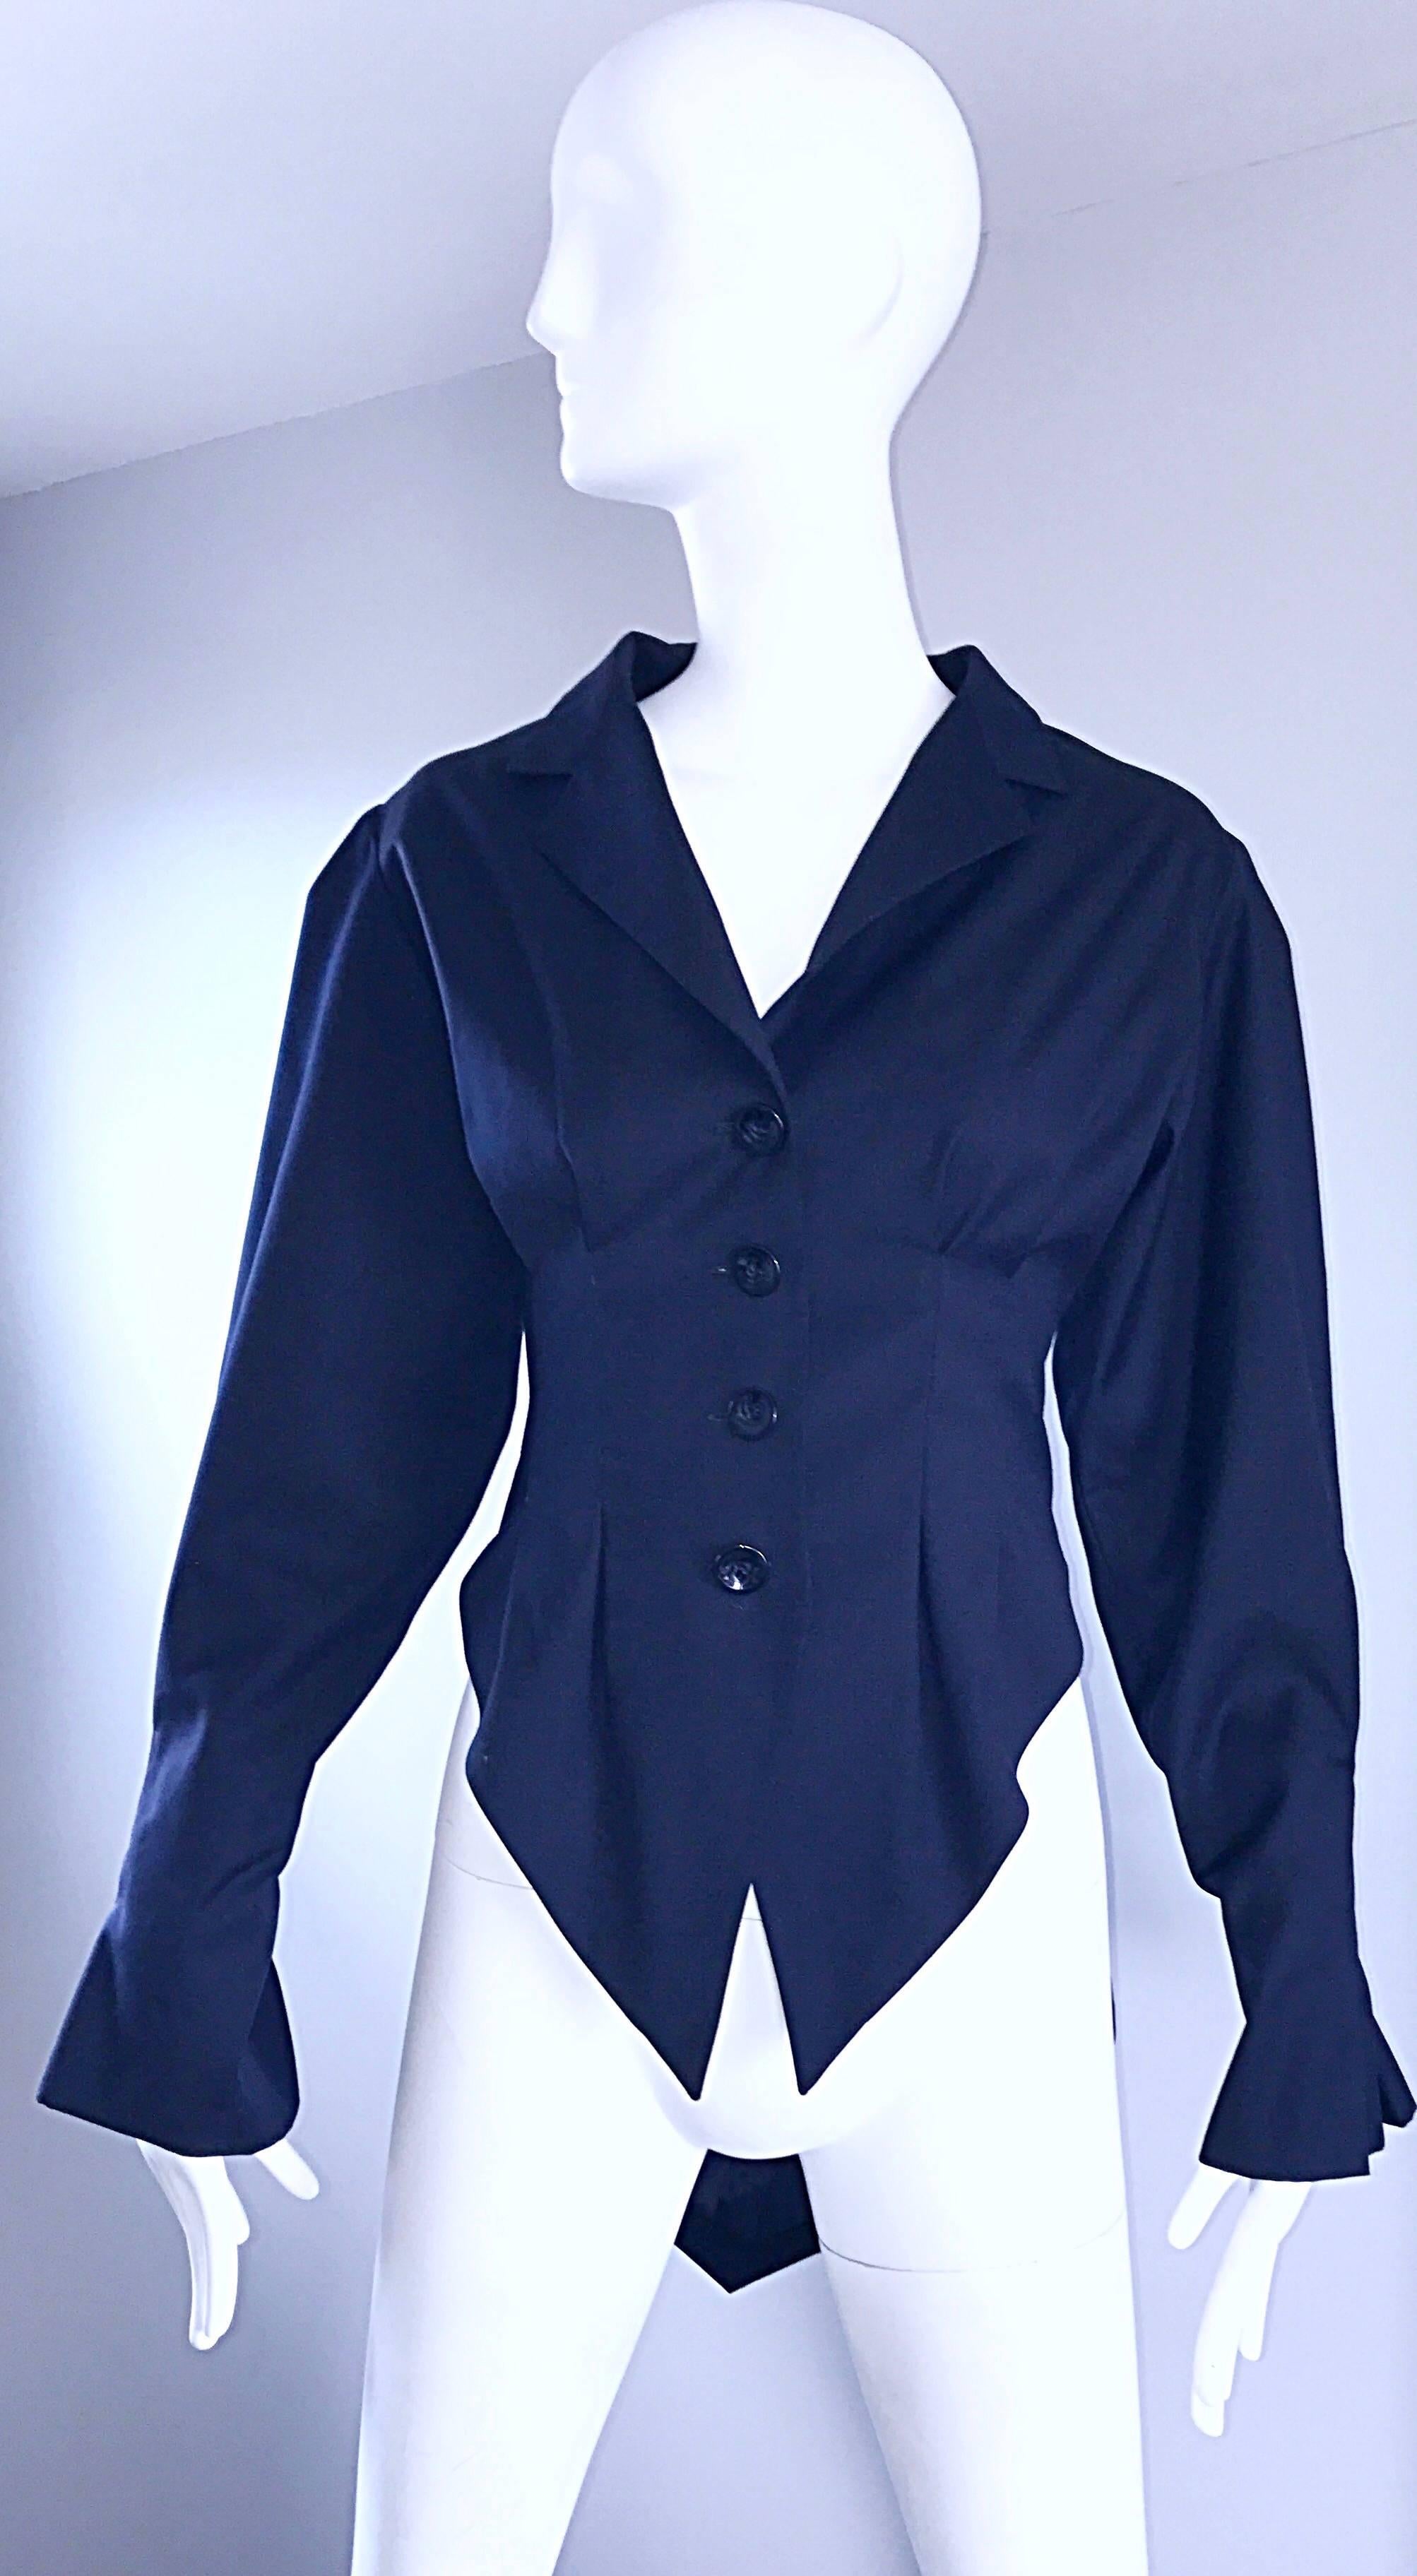 Fabulous RUBIN SINGER midnight / dark navy blue Avant Garde asymmetrical tuxedo tail jacket! From the Fall 2008 Collection, this gem has serious couture work, with heavy attention to detail. Four buttons up the front. Intricate darting at each bust.